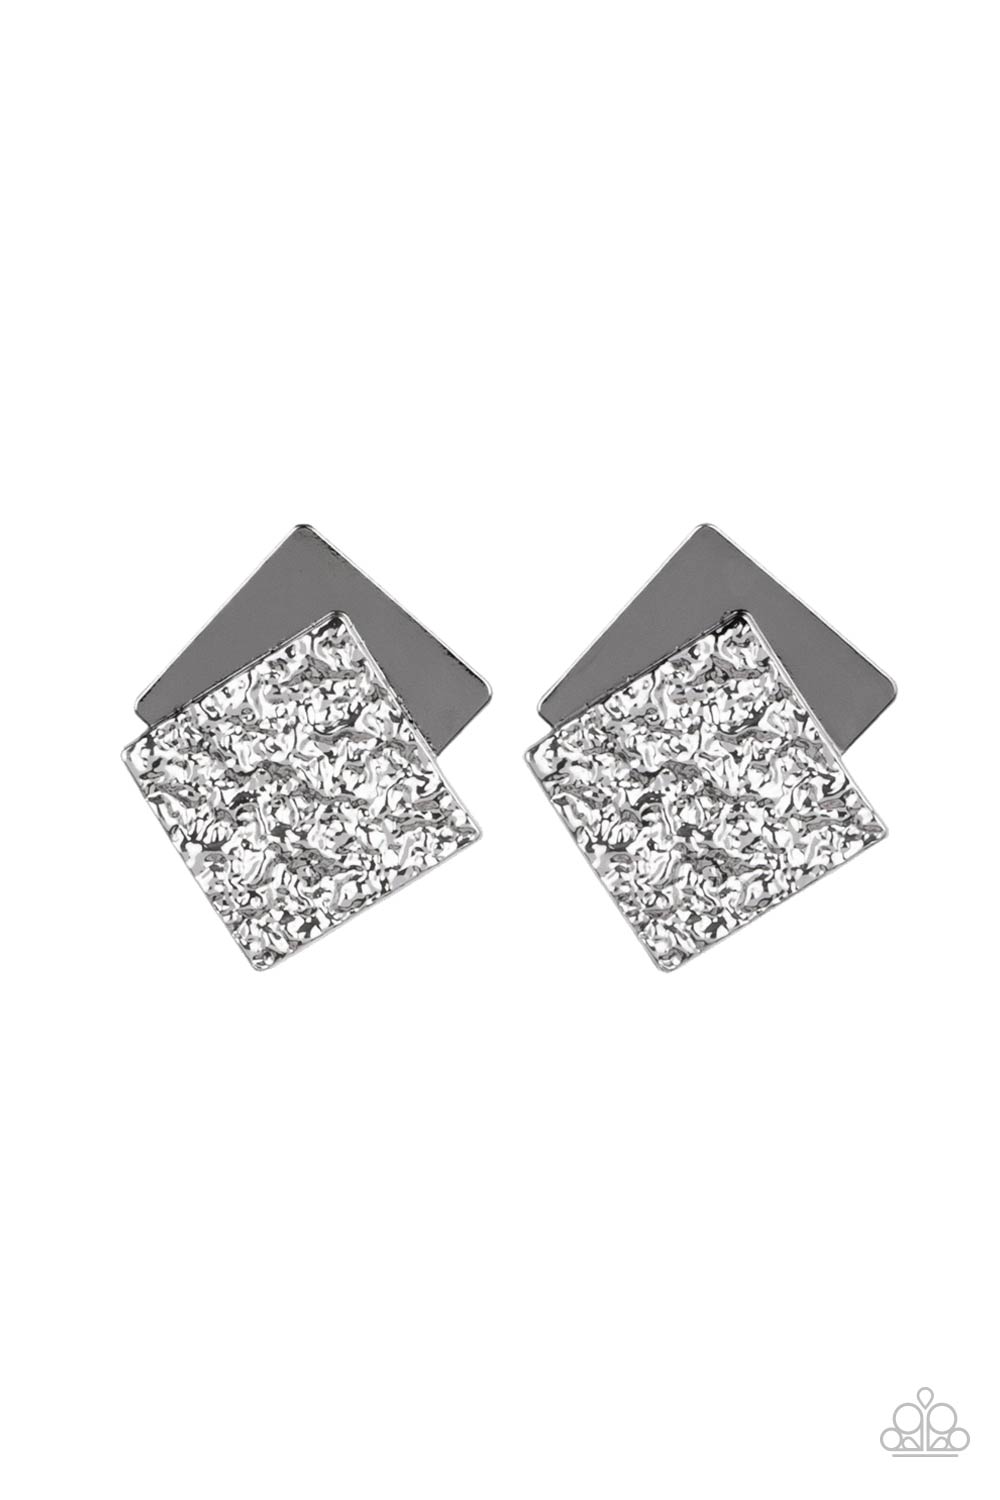 five-dollar-jewelry-square-with-style-black-post earrings-paparazzi-accessories